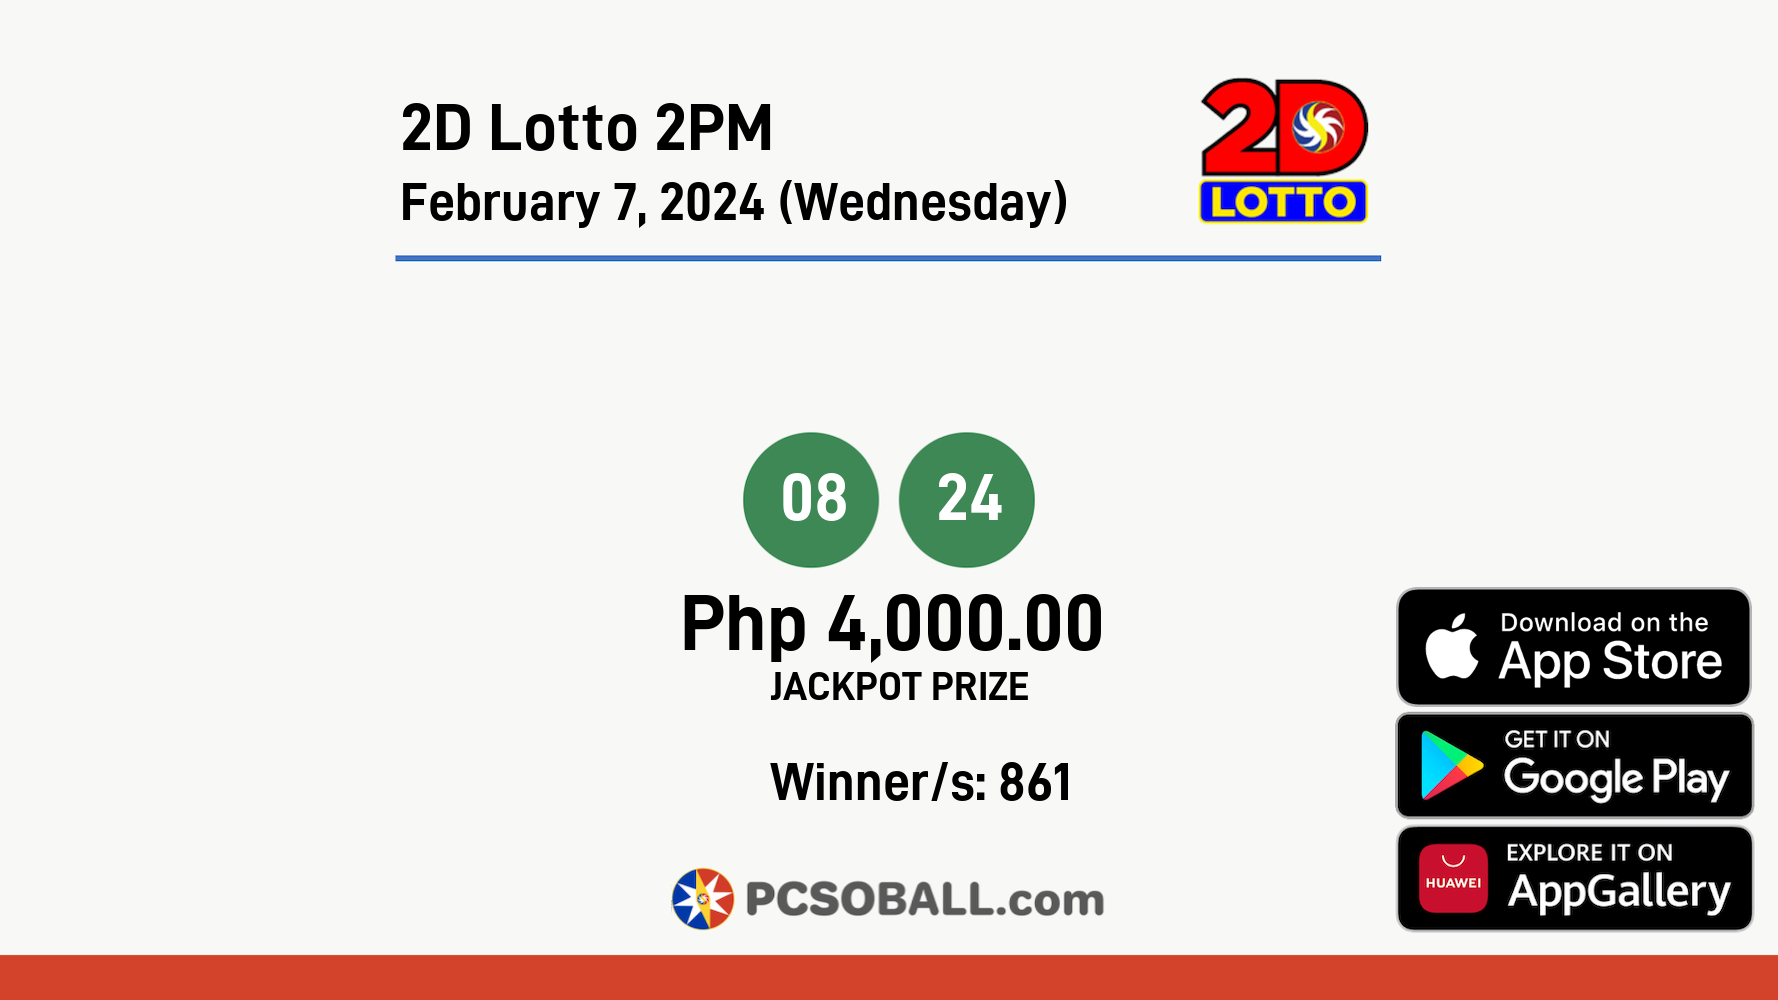 2D Lotto 2PM February 7, 2024 (Wednesday) Result